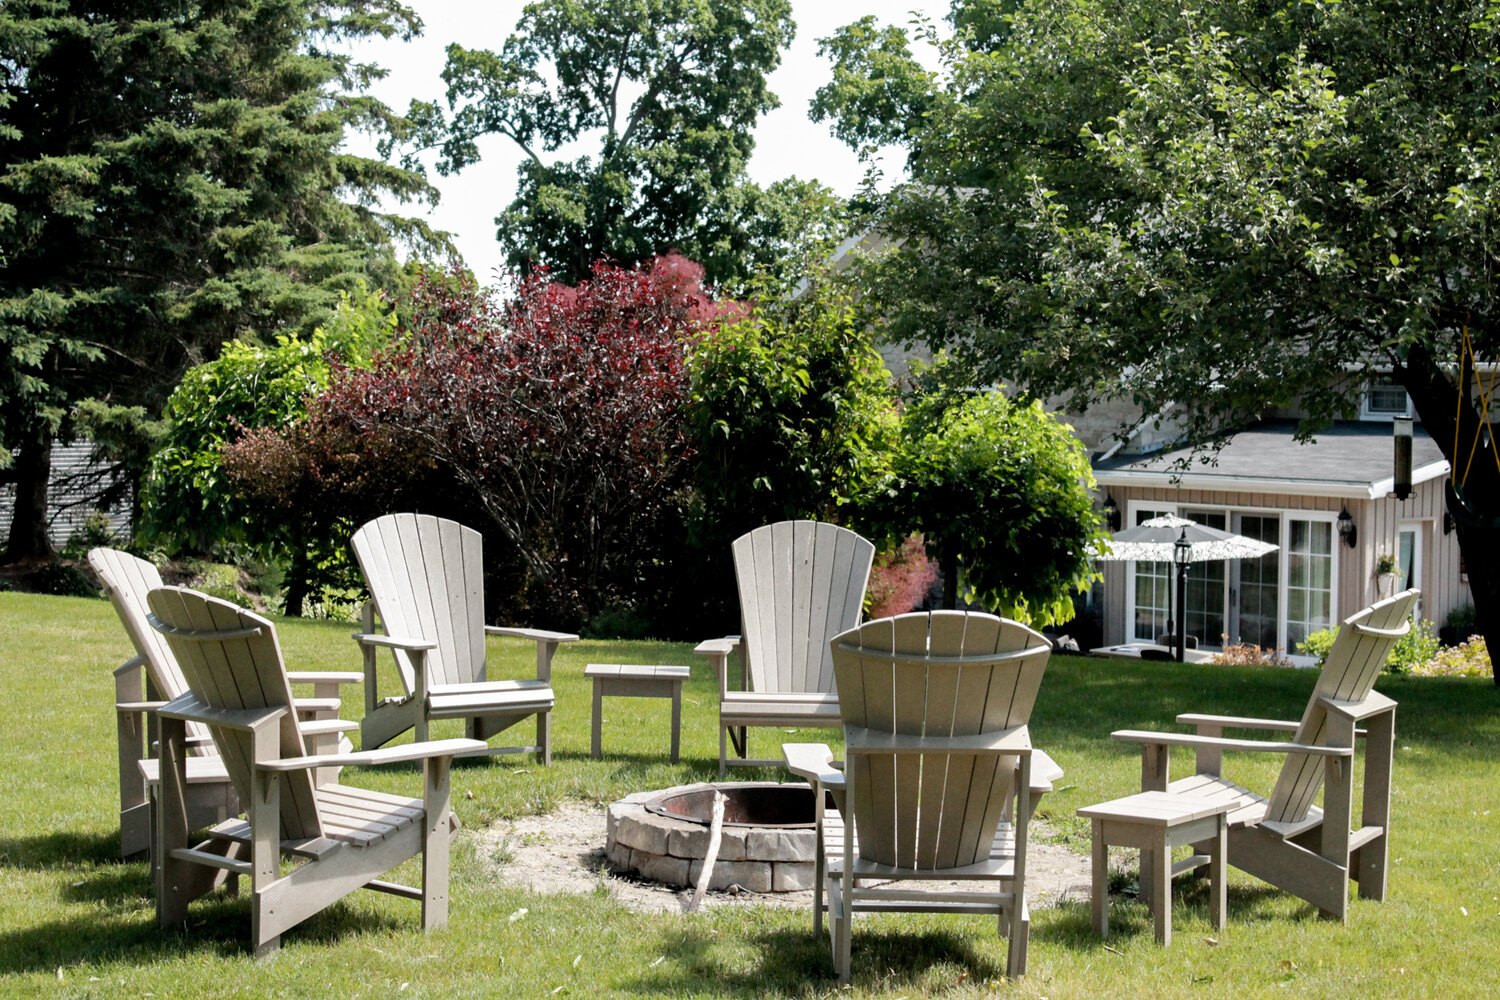 Firepit surrounded by Adirondack Chairs in the backyard gardens of Huntingdon House B&B in Stirling, Ontario